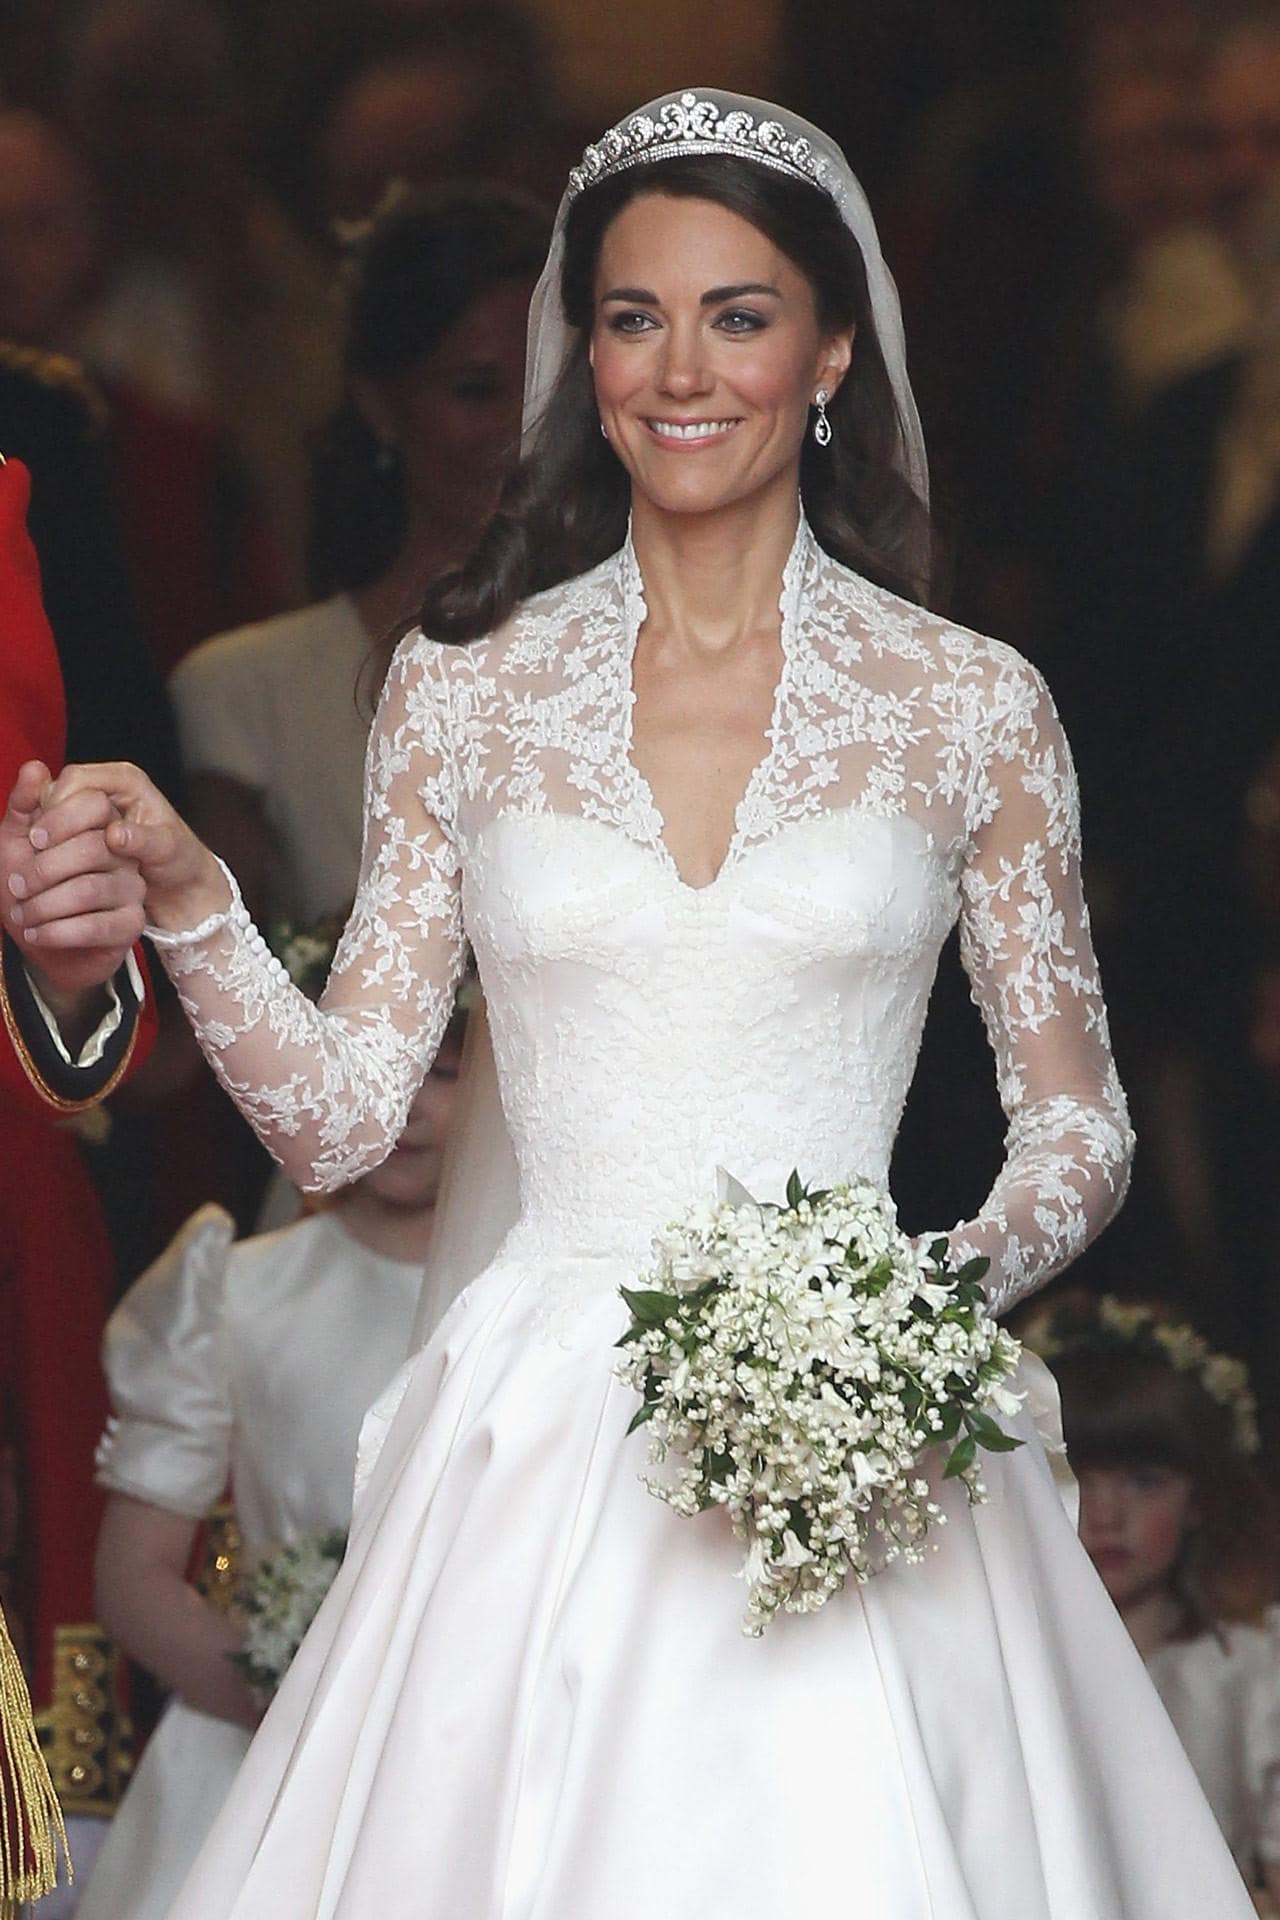 You Can Now Wear Kate Middleton's Wedding Dress For $300 ...